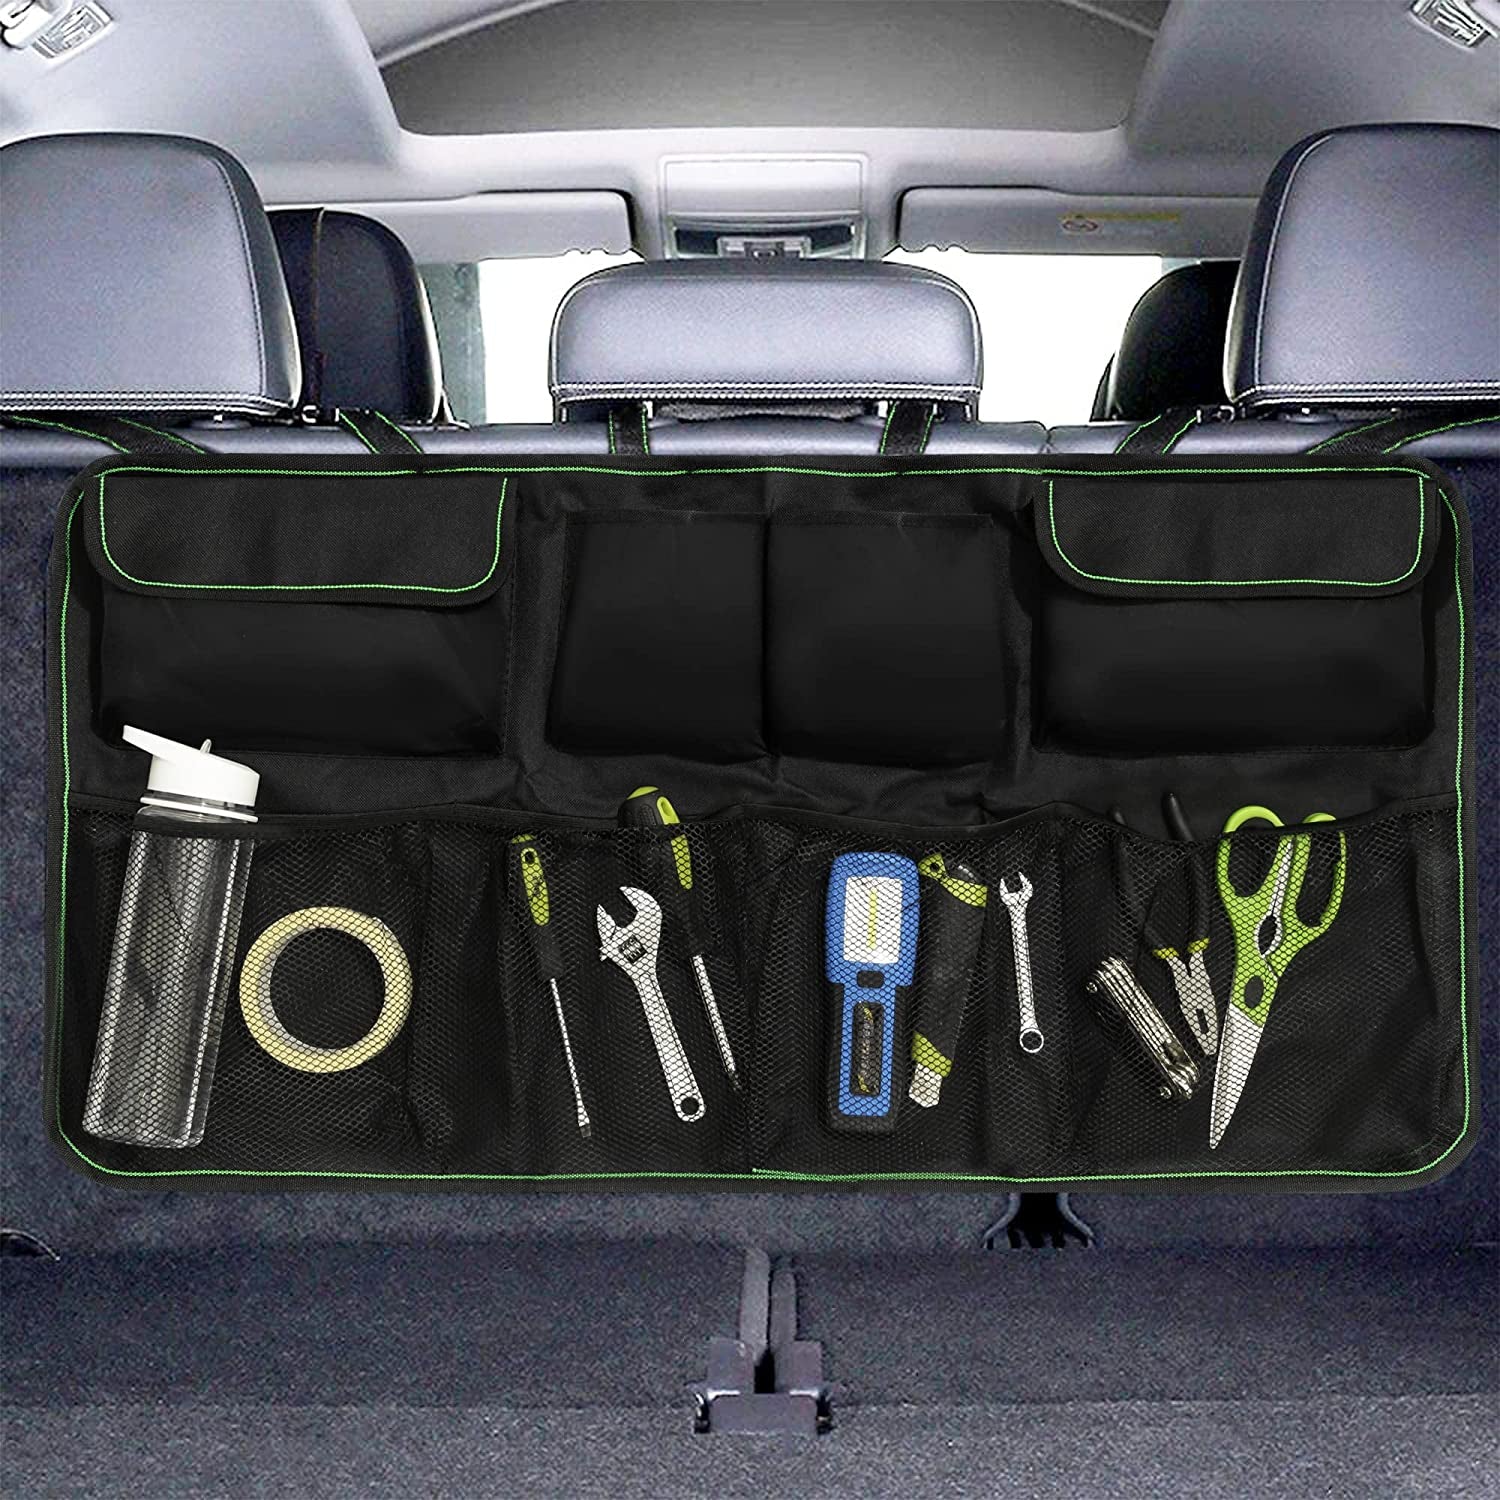 Car Boot Seat Organiser with Adjustable Straps - Storage Accessories Organisers - Seat Back Protectors, Medium Large Interior Travel Storage, Foldable Cargo Net Car Backseat Cover Gadgets